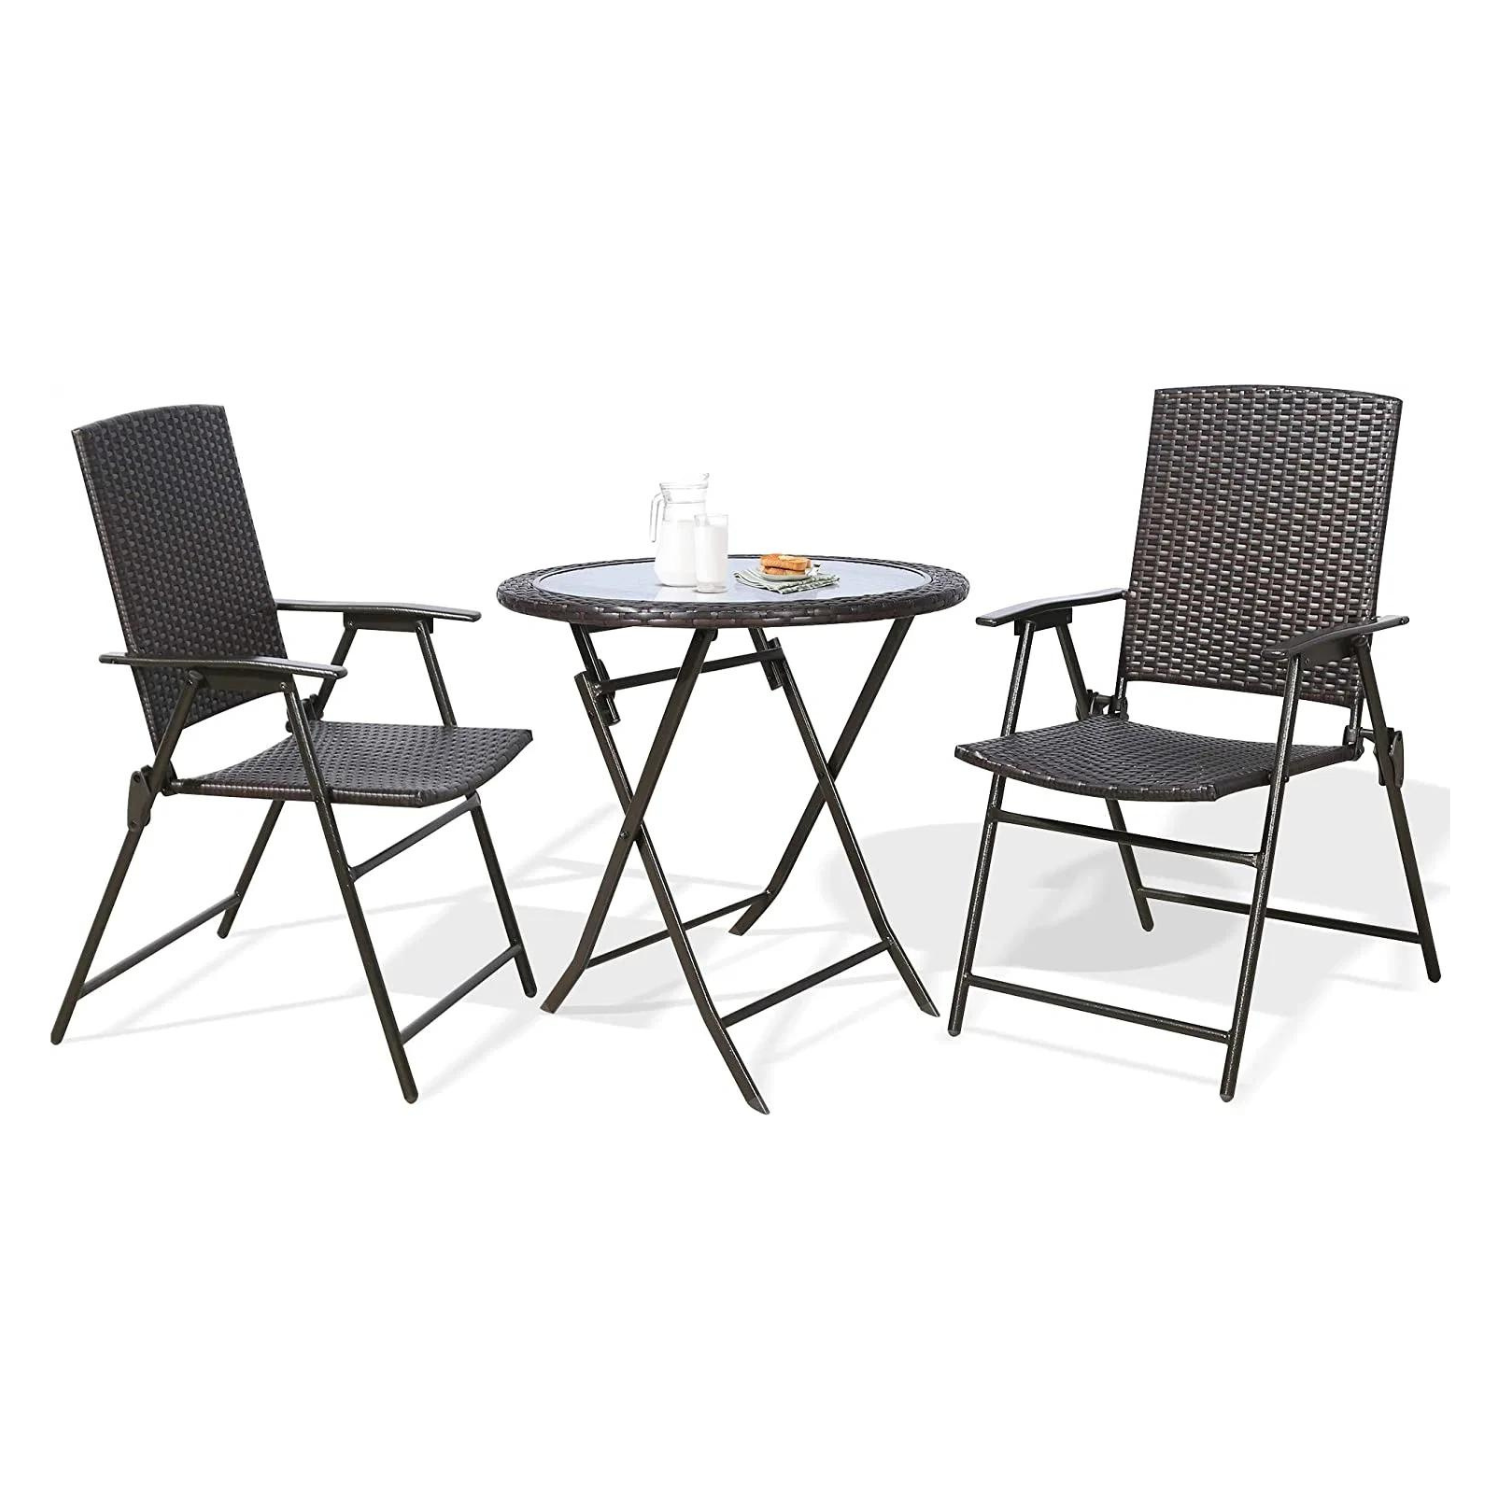 Outdoor 3-Piece Wicker Folding Bistro Set - Perfect for Balcony, Garden, and Backyard Furniture